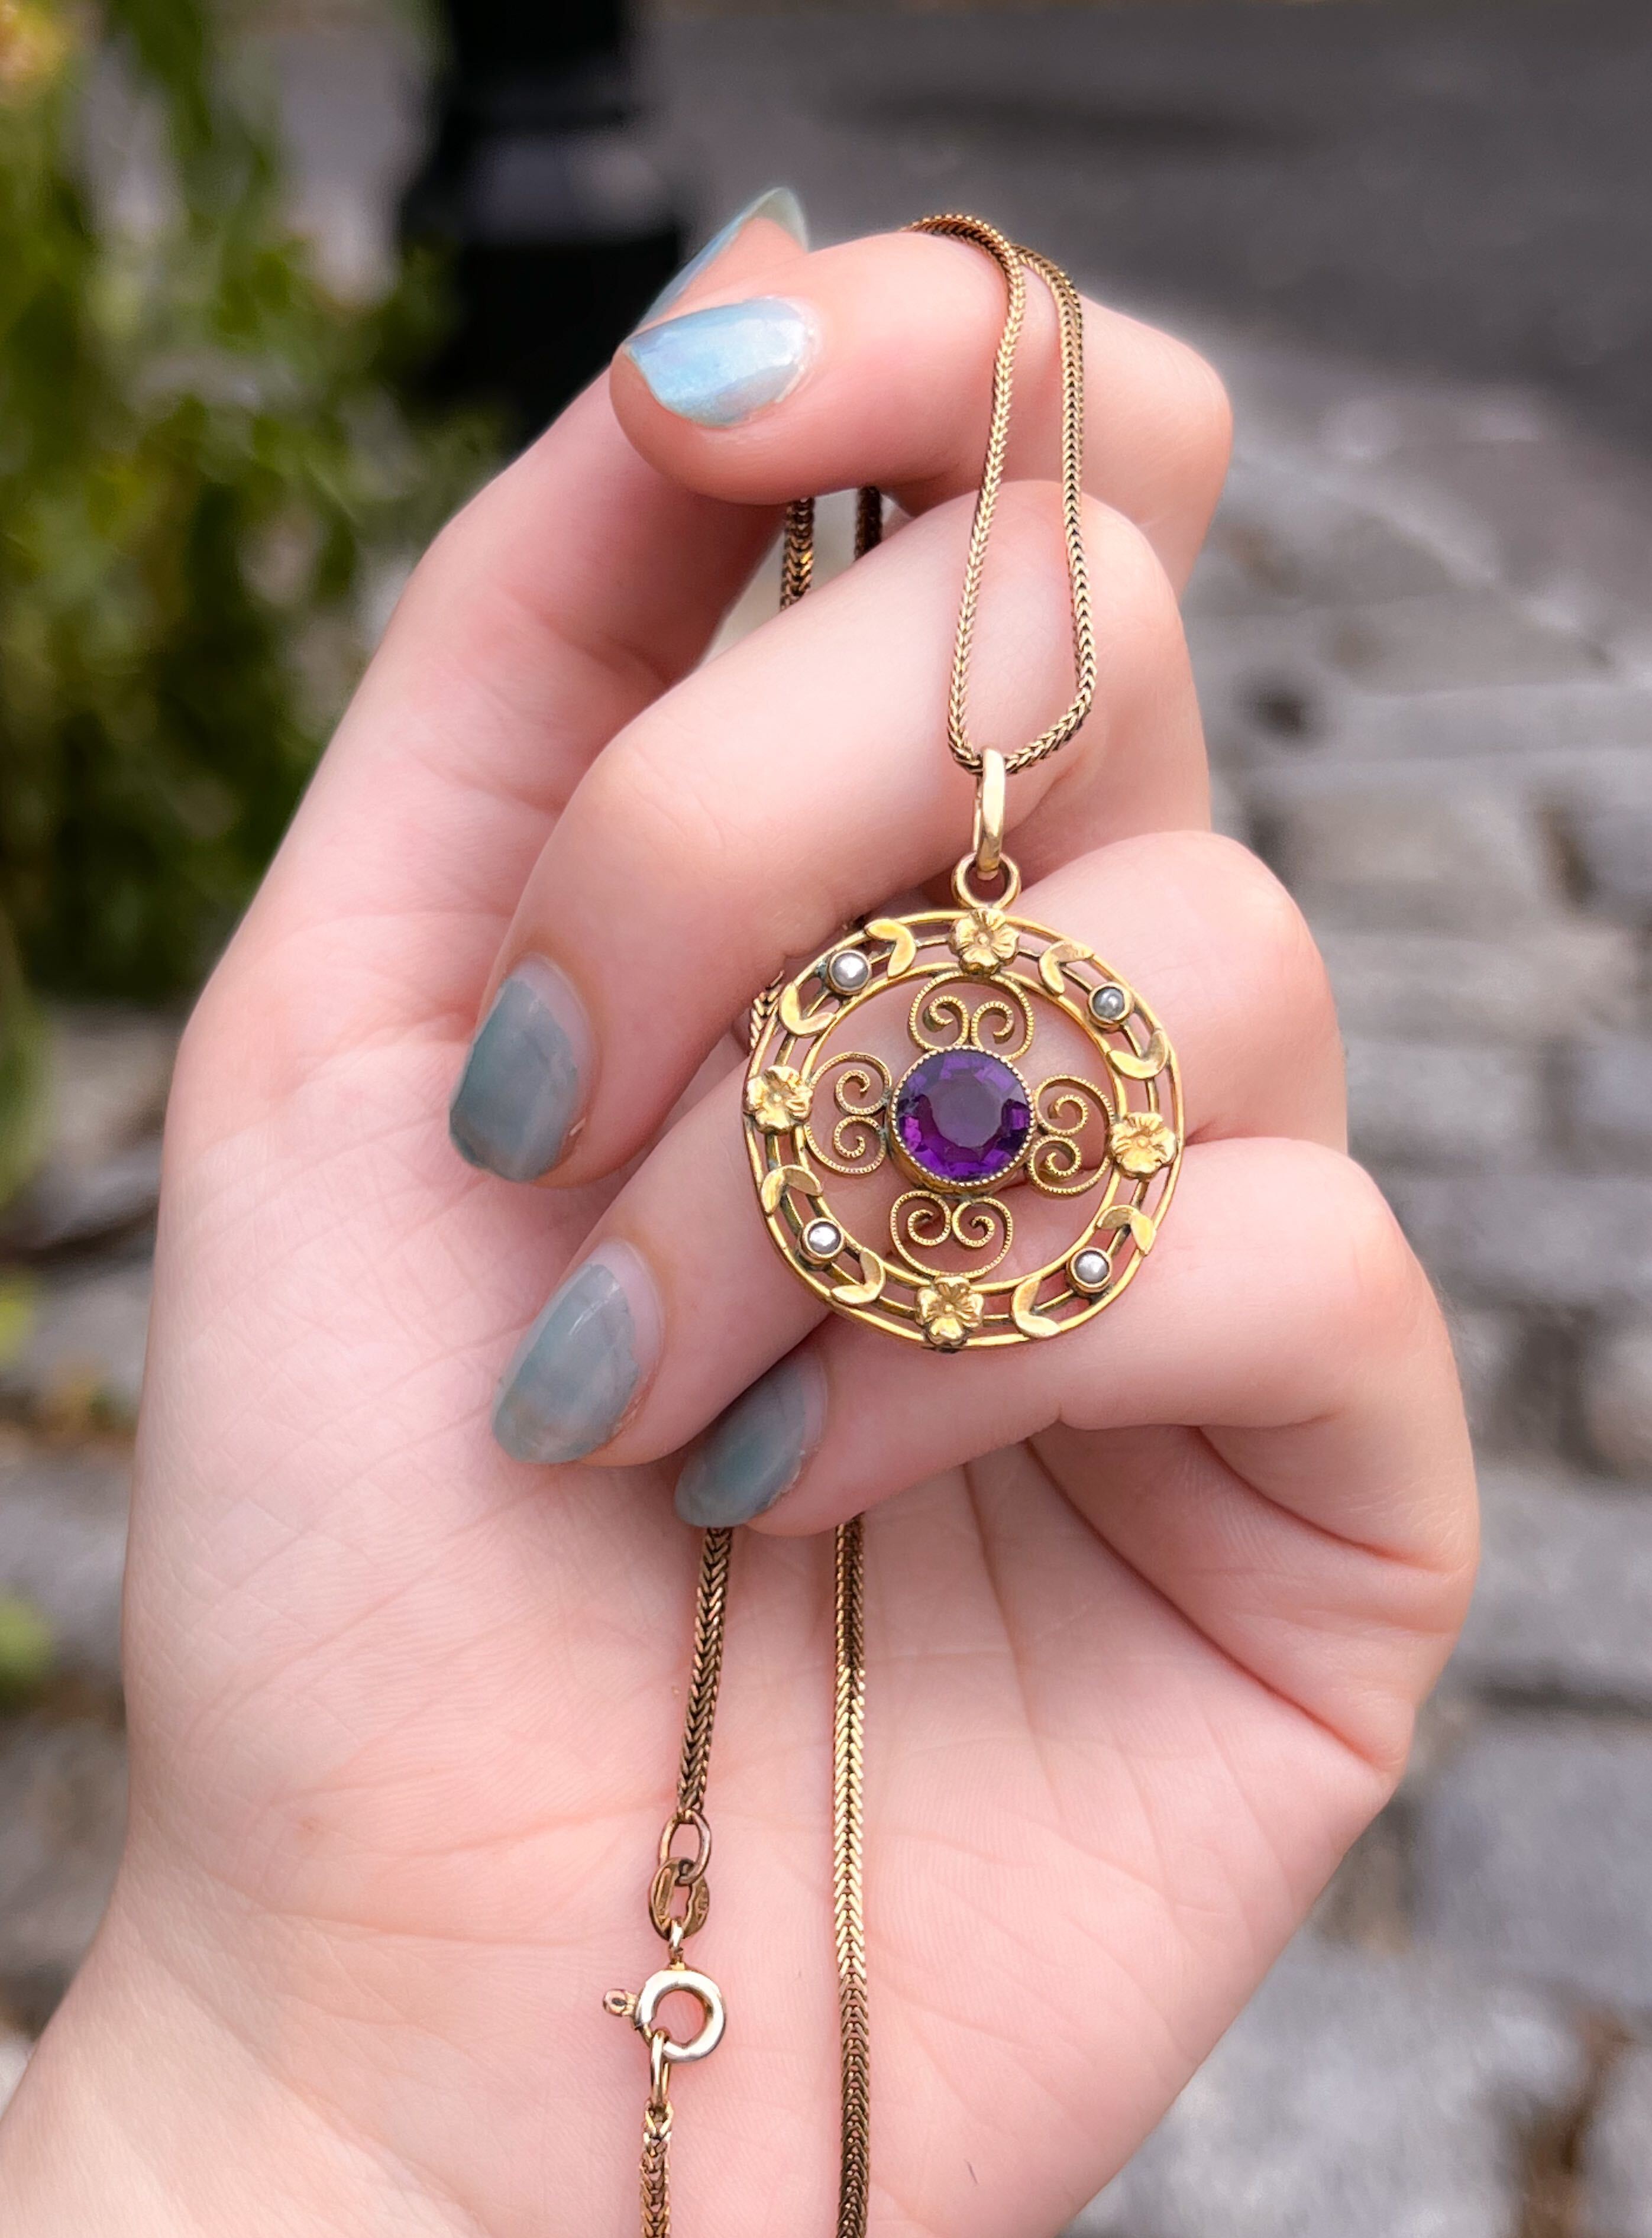 Edwardian 9k Amethyst Paste + Pearl Pendant and Chain